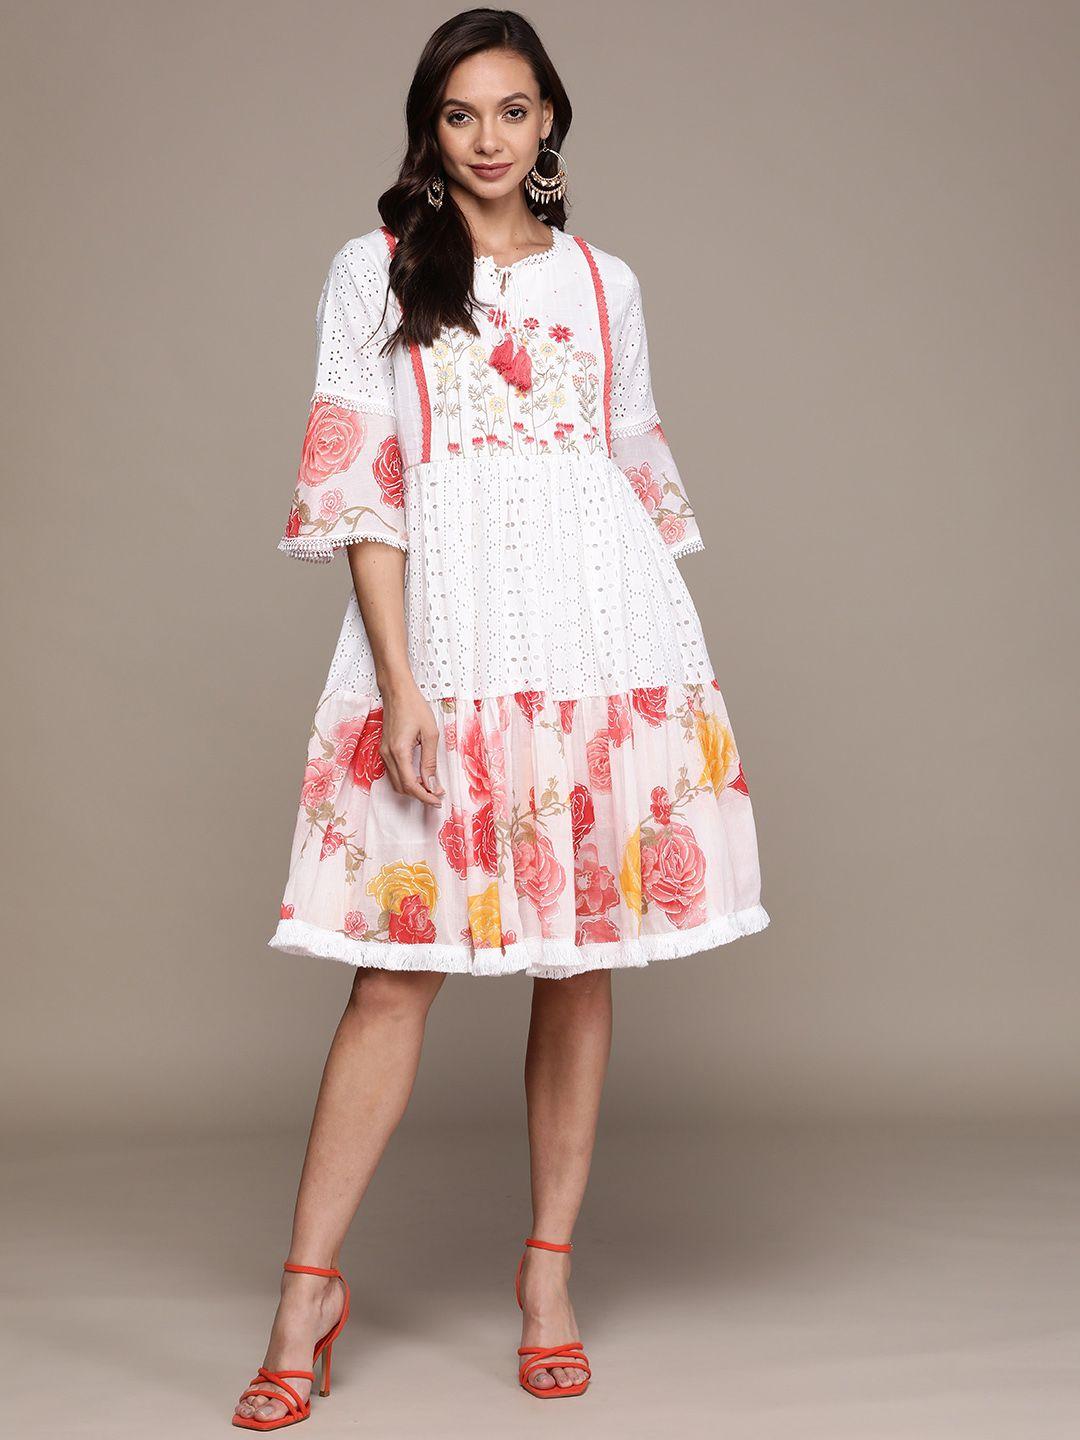 ishin-white-&-peach-coloured-floral-embroidered-tie-up-neck-a-line-dress